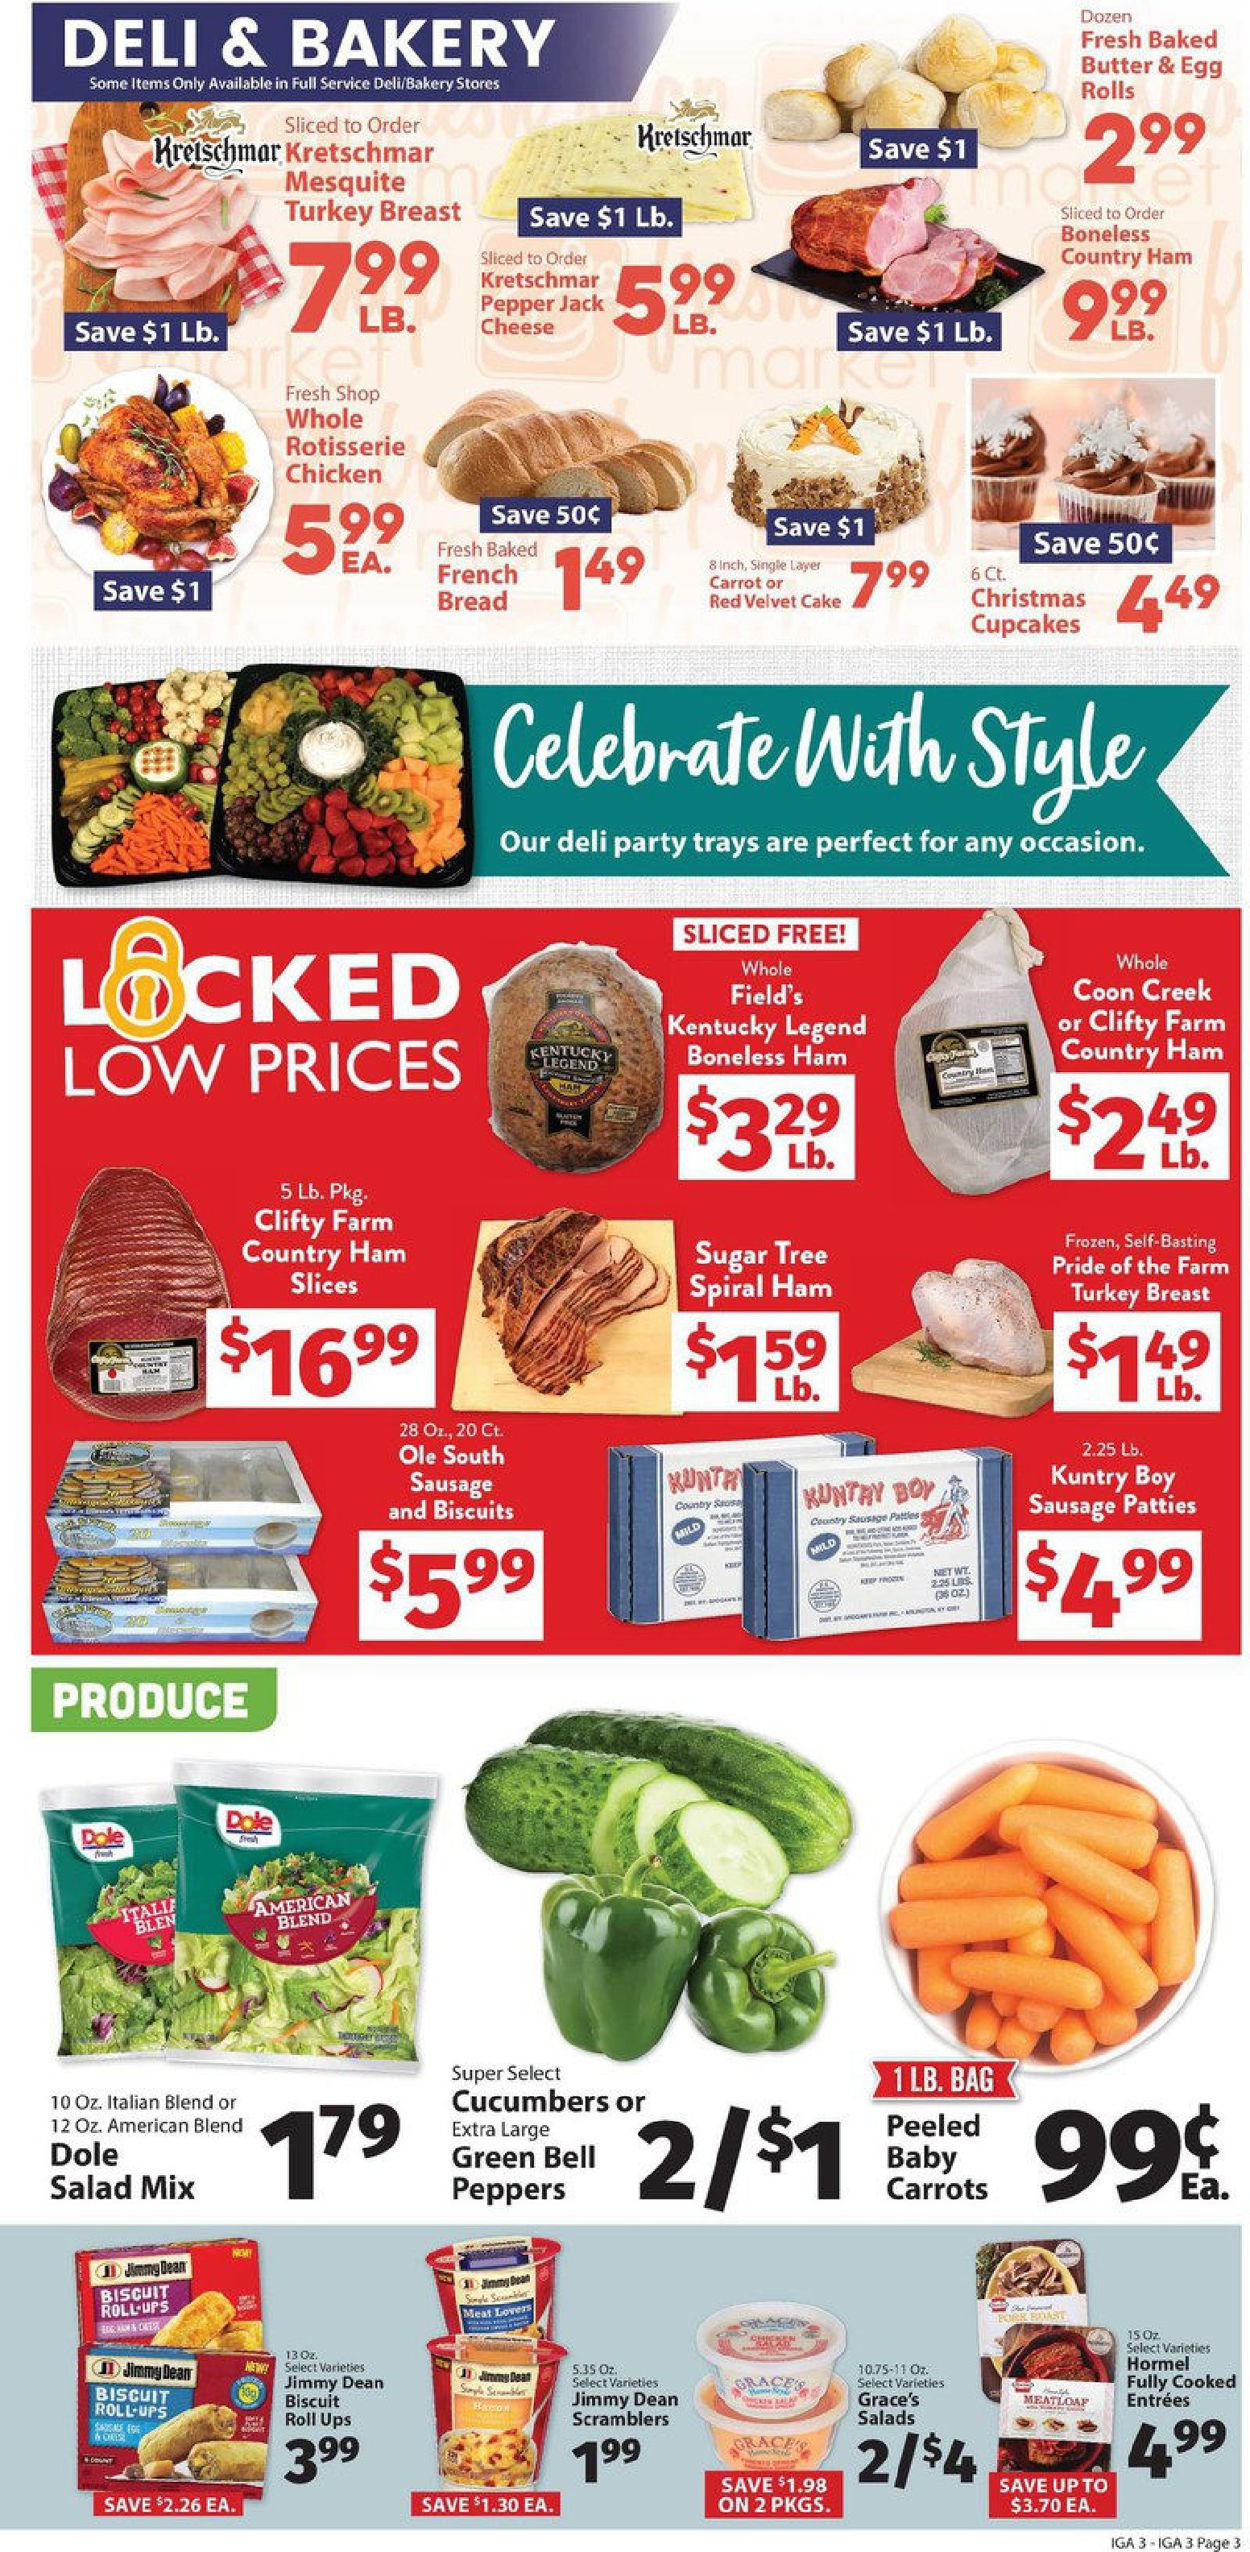 IGA Ad from 12/02/2019